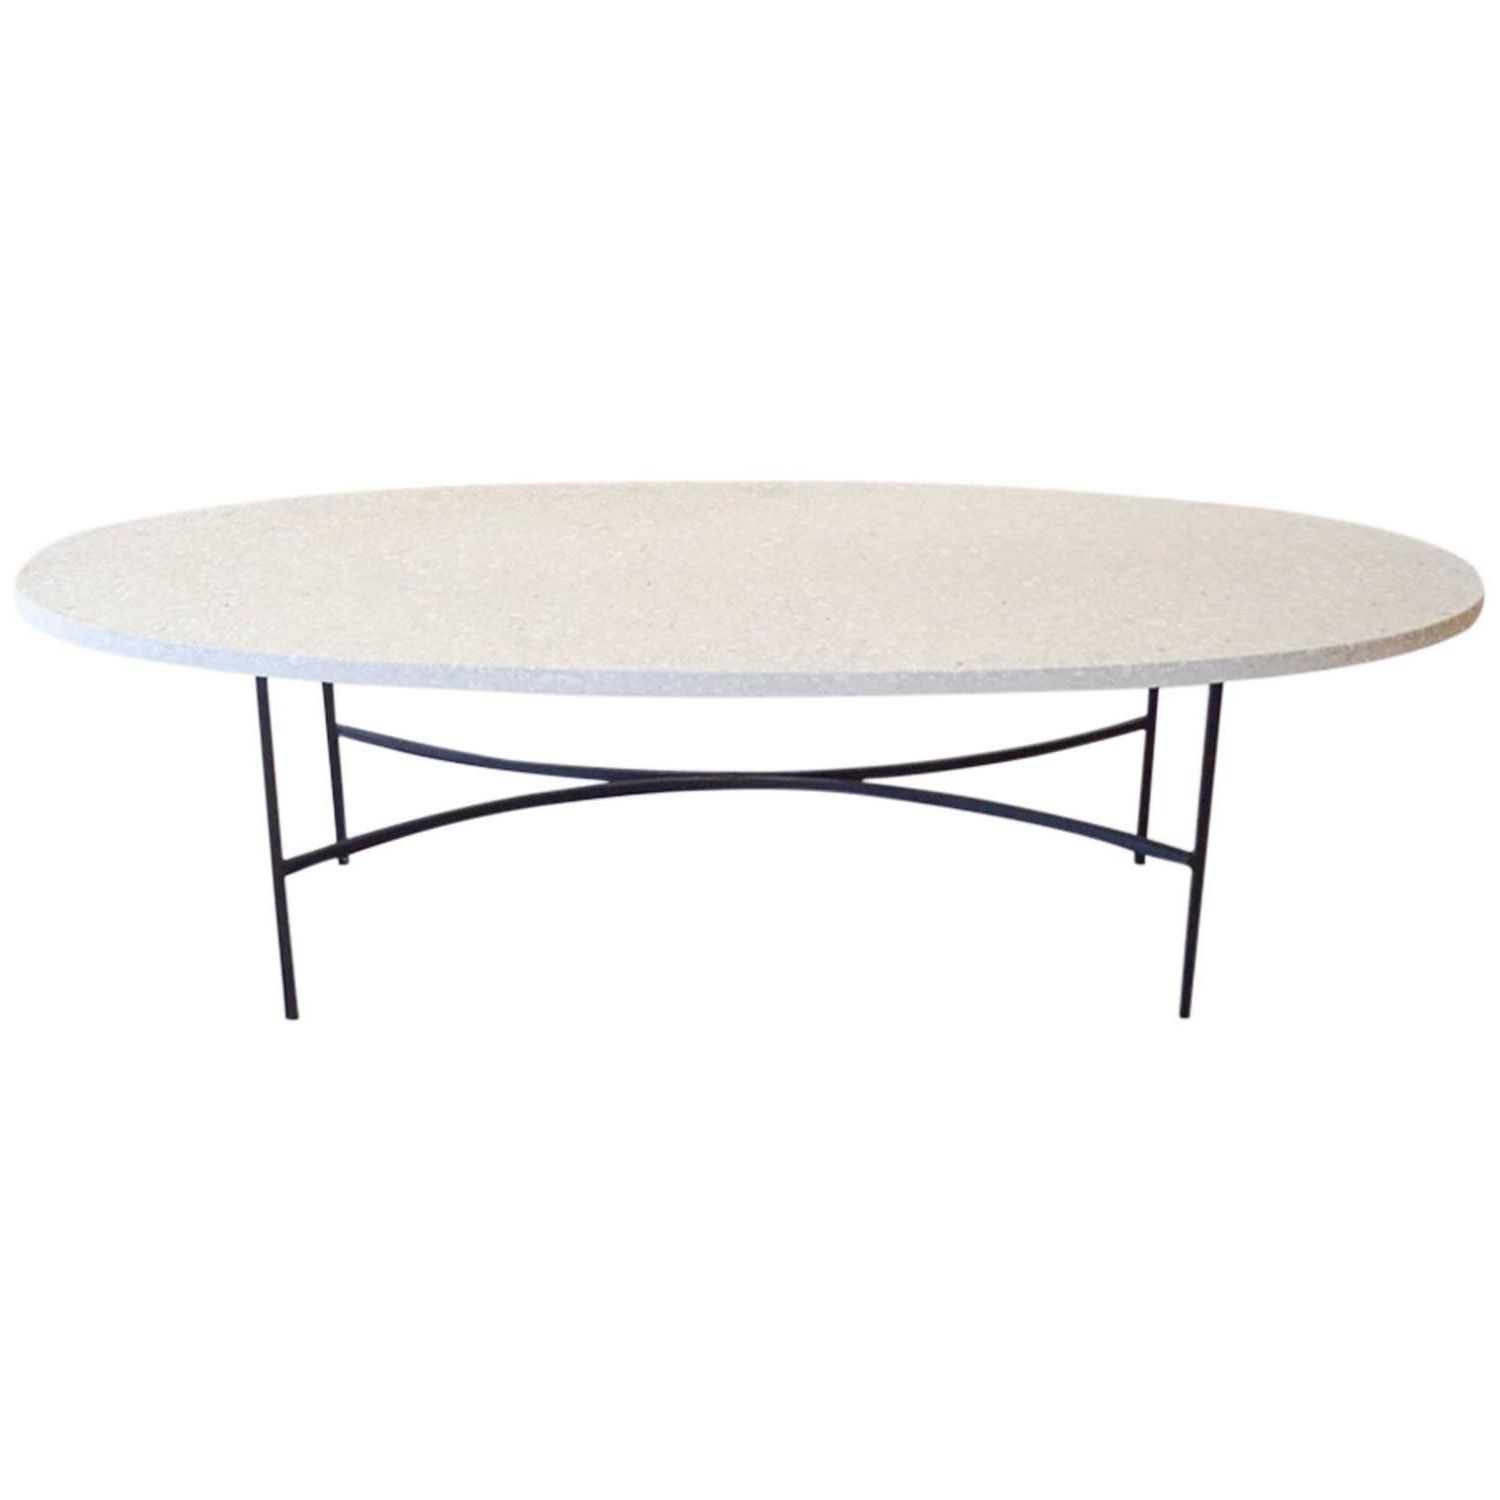 Trendy Oval Aged Black Iron Coffee Tables Intended For Terrazzo And Iron Oval Coffee Table At 1stdibs (View 2 of 20)